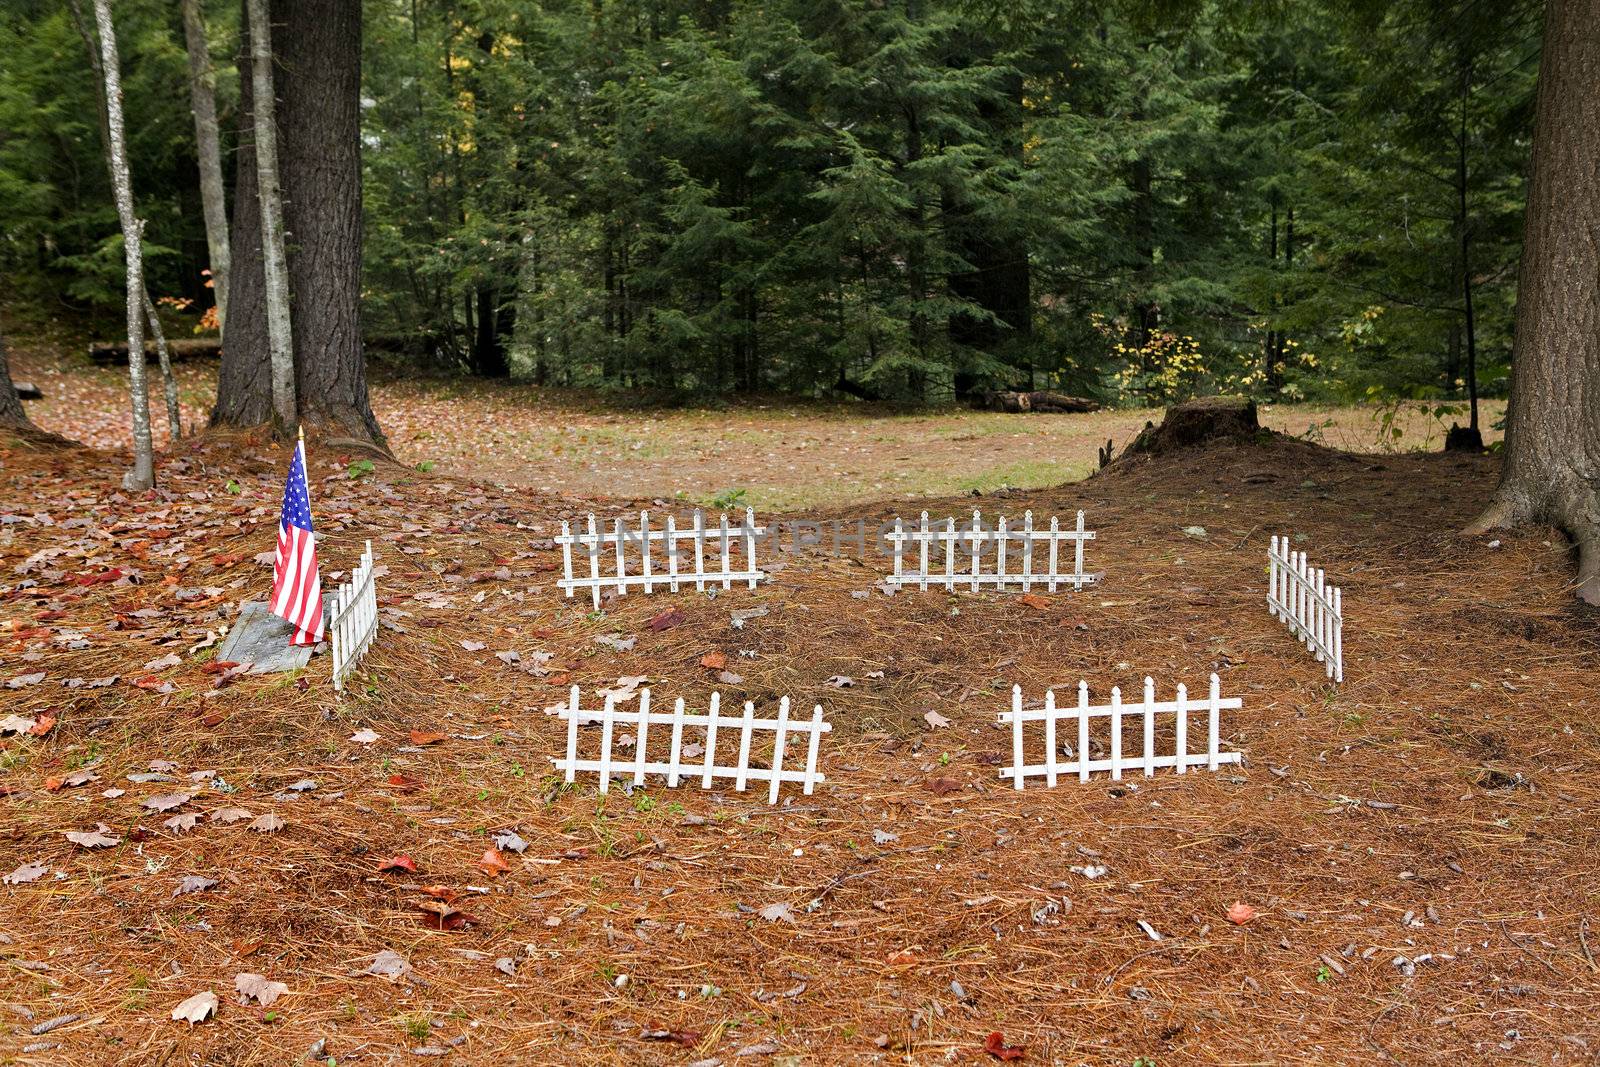 American flag and white fence surround a war veteran grave located in a wooded cemetary area with ground covered in pine needles.